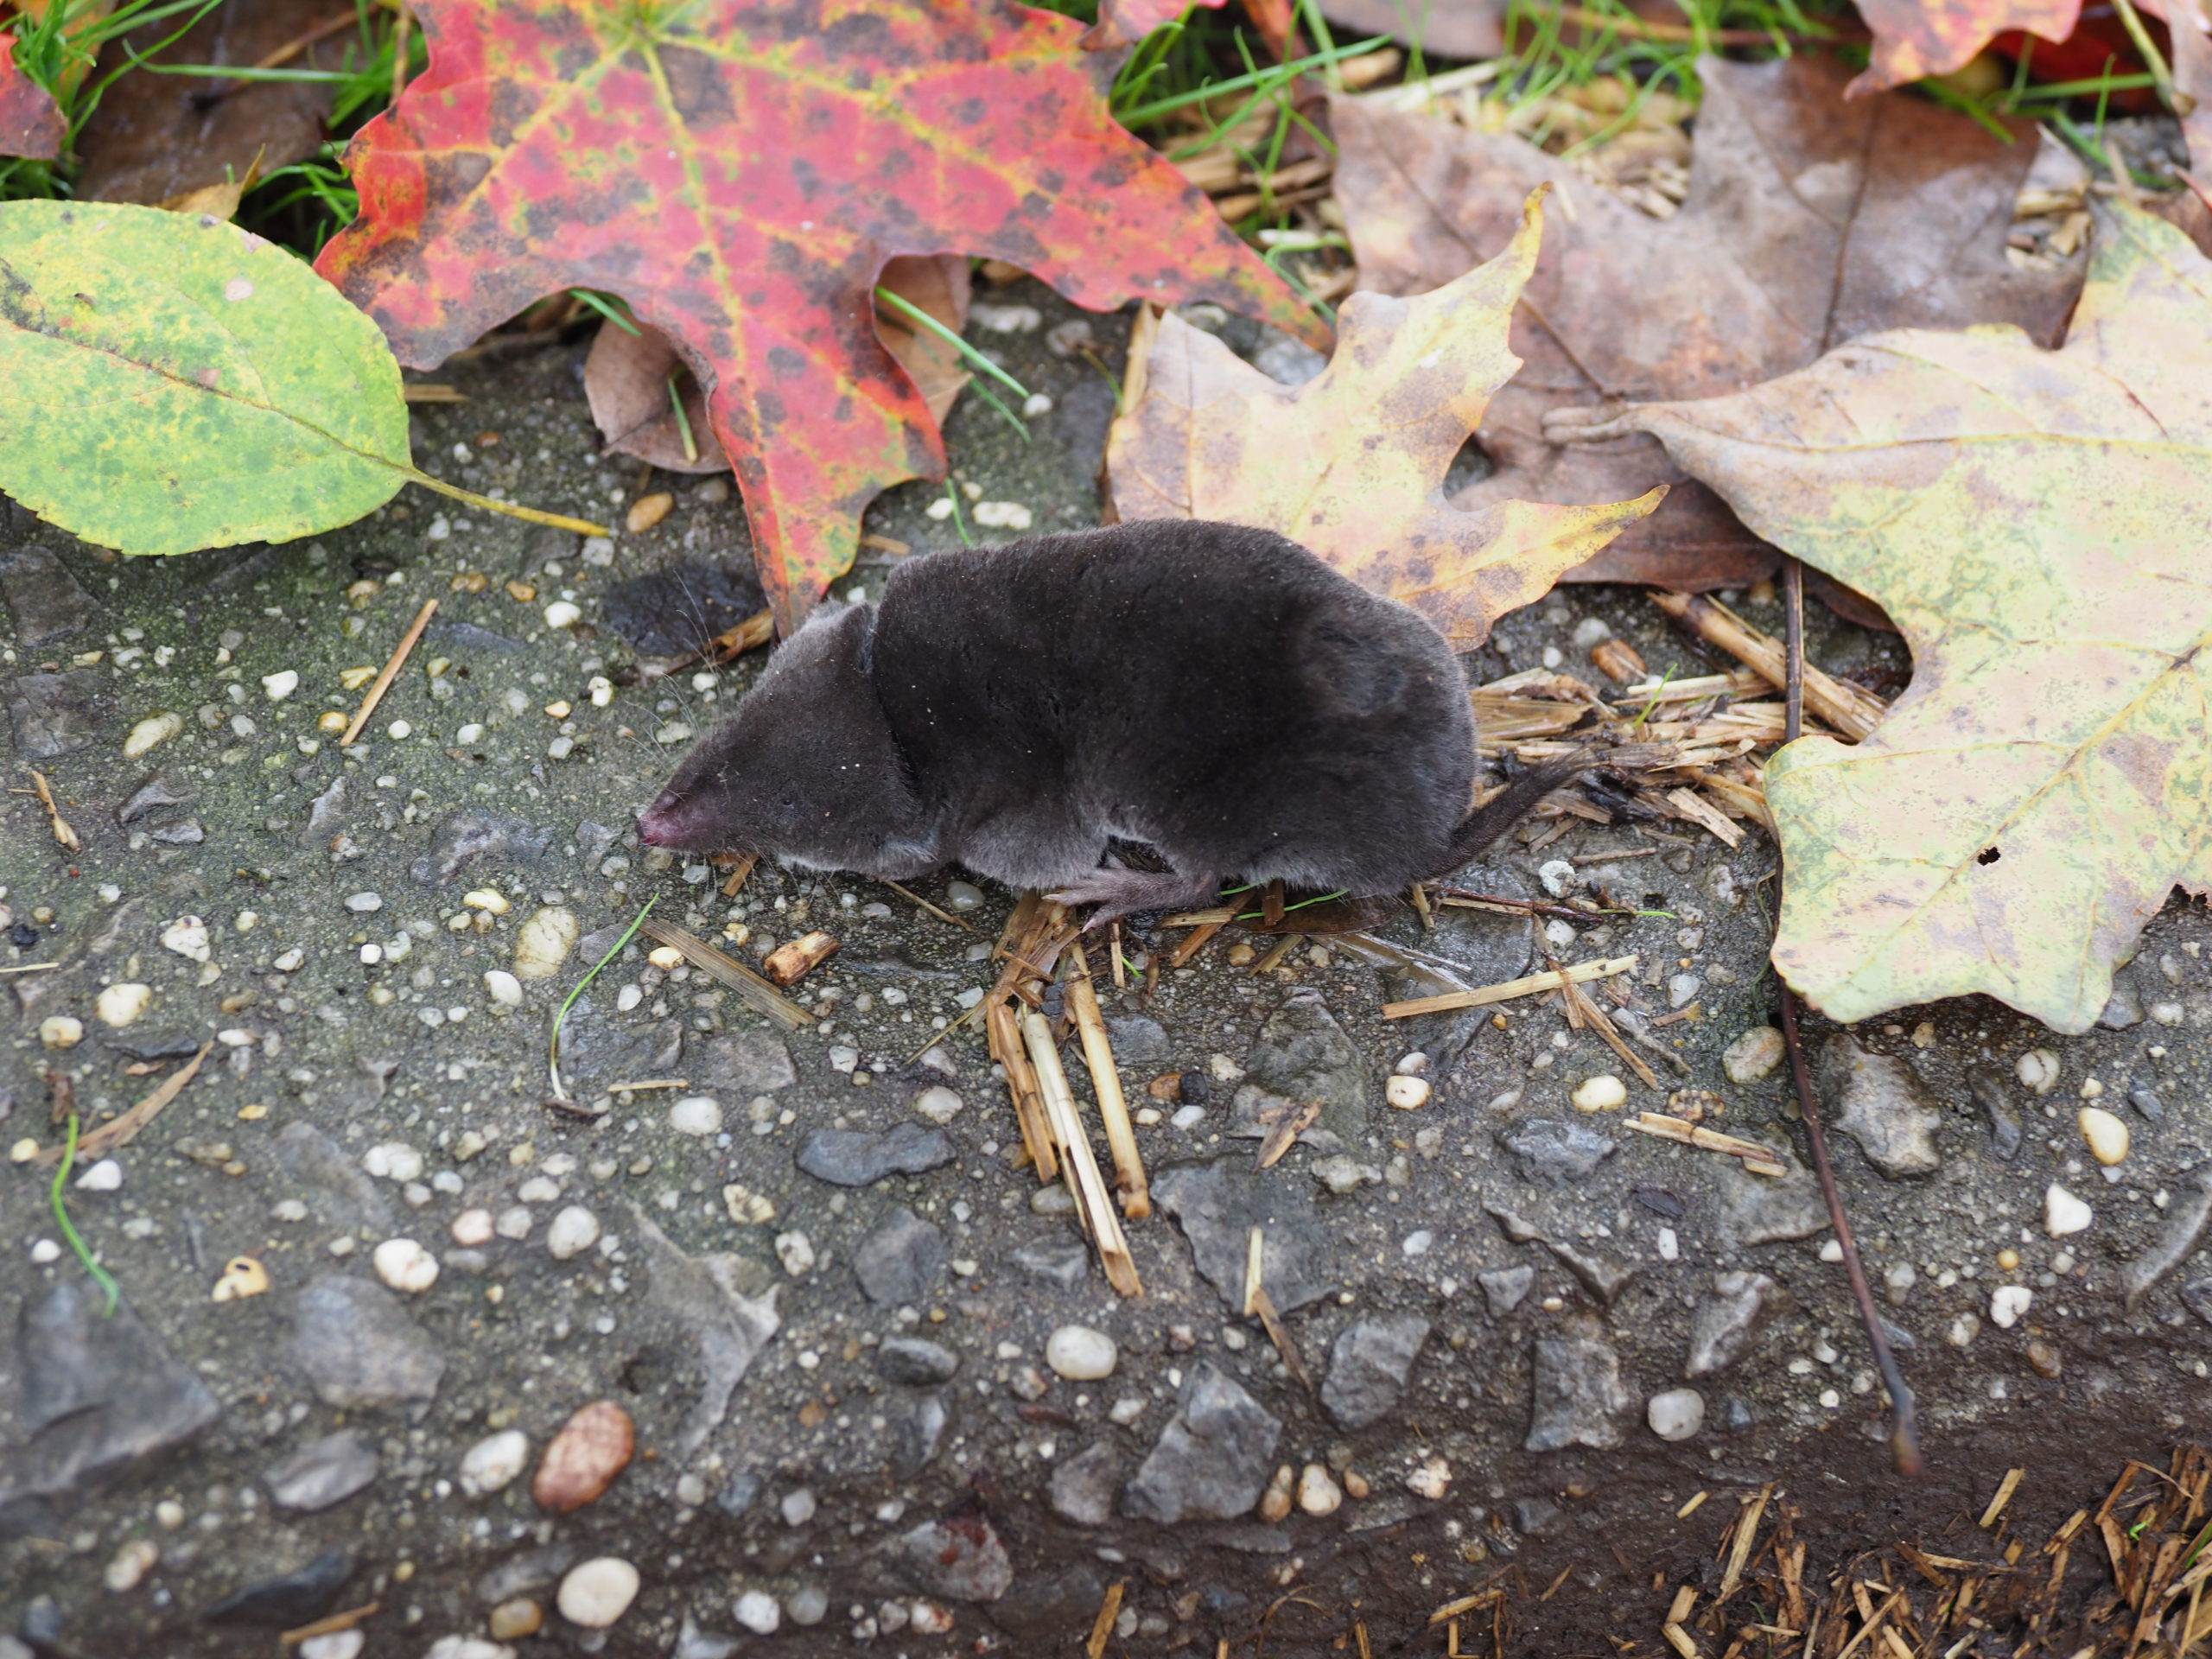 This is a shrew. They are more of a friend than a foe in the garden so try not to trap them.  Smaller than mice and voles they have short tales, pointed snouts and ears that are nearly invisible.